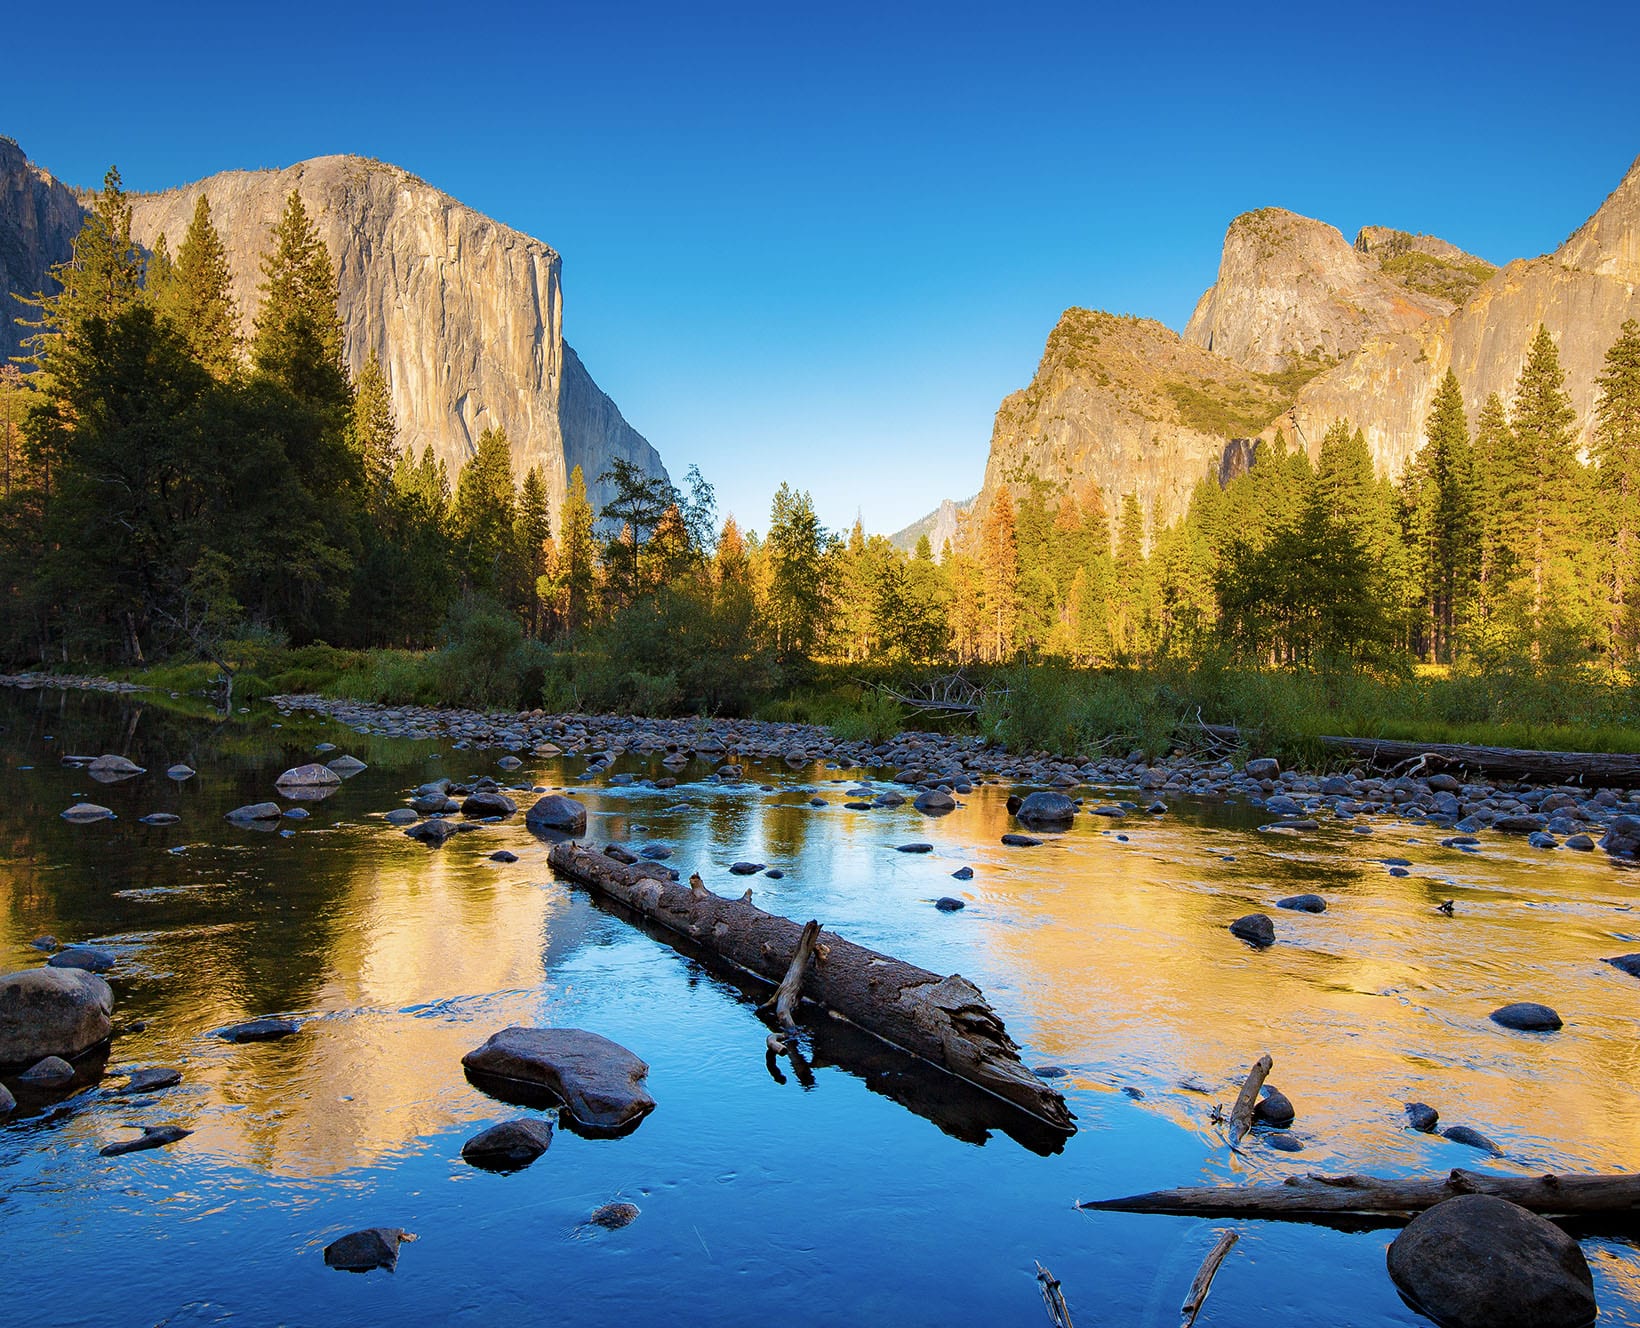 Scientists use location intelligence to identify areas most important to protect for the 30x30 initiative like Yosemite